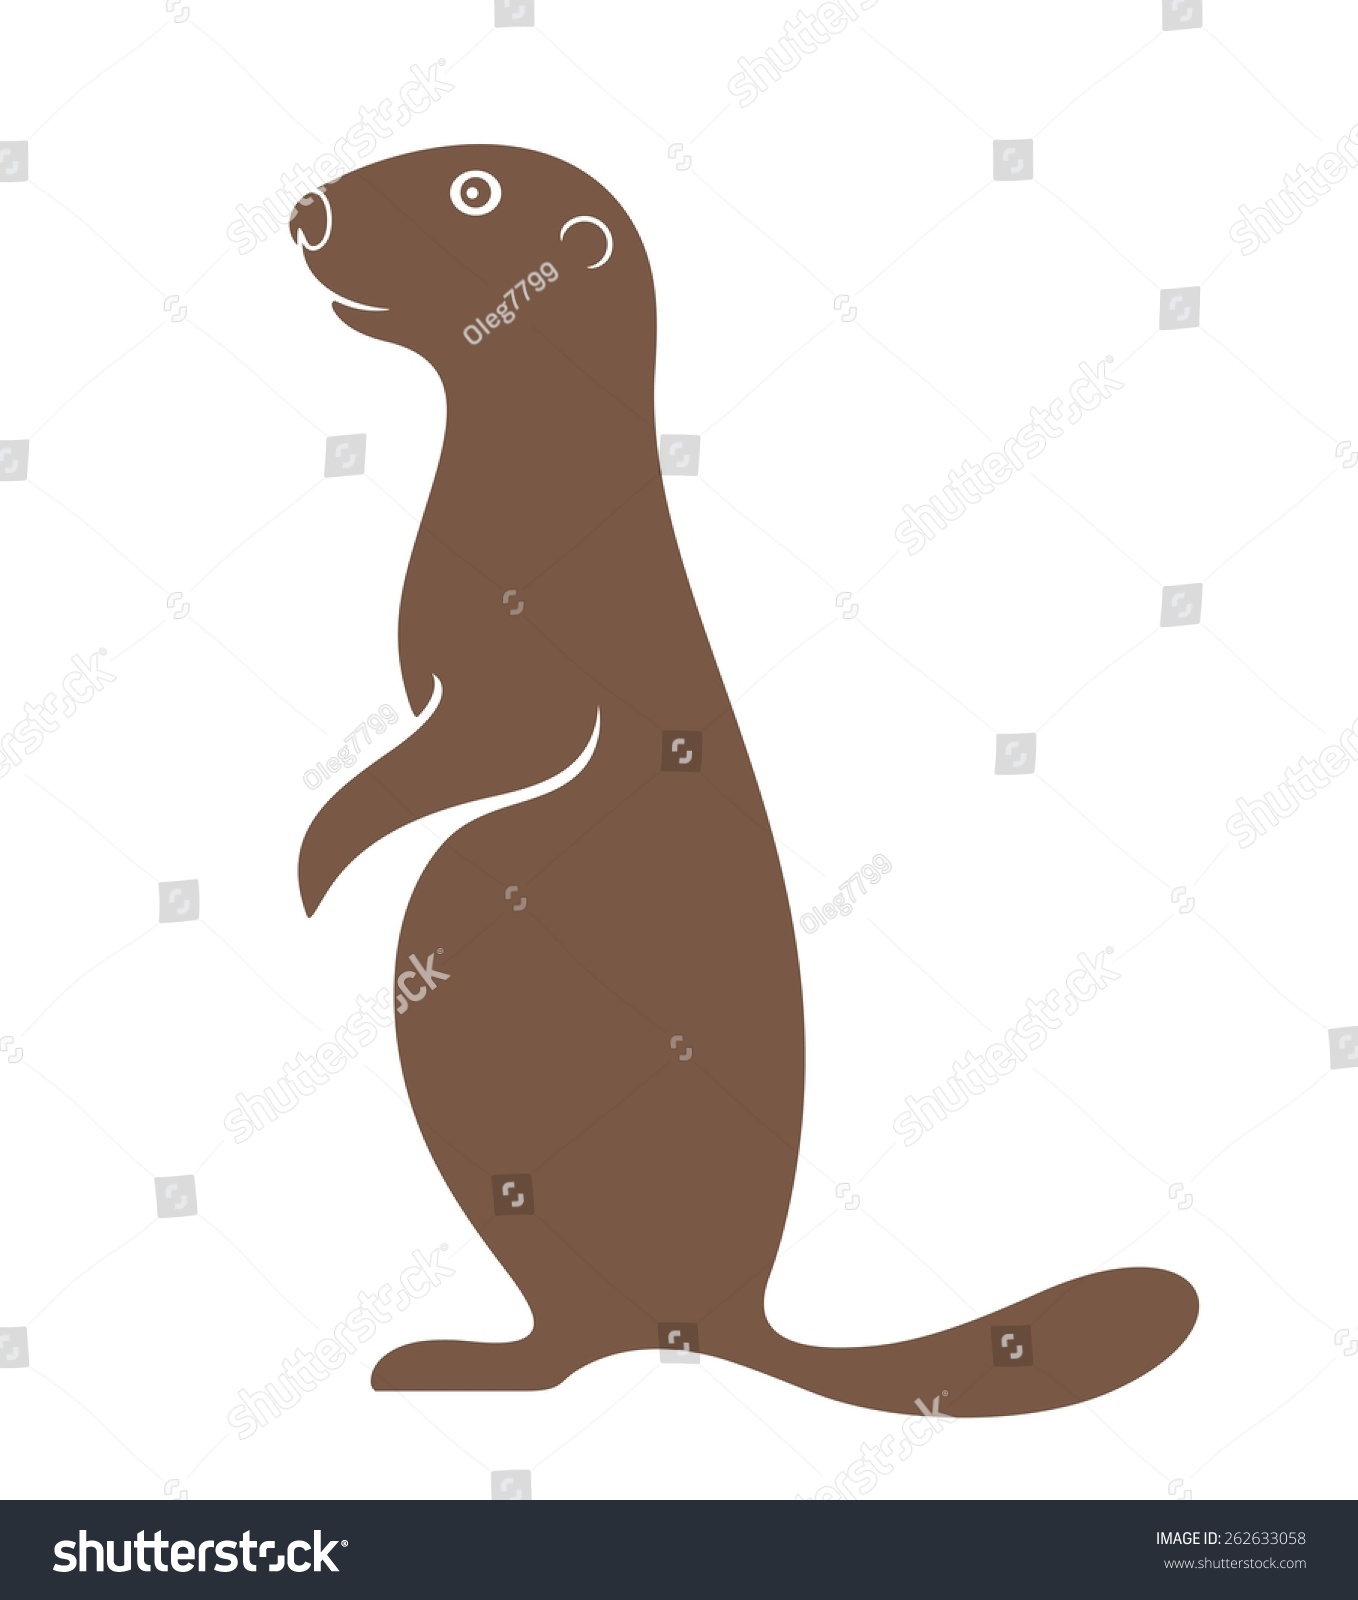 Gopher. Vector. Silhouette. Icon. Sign. Set. Animal - 262633058 ...